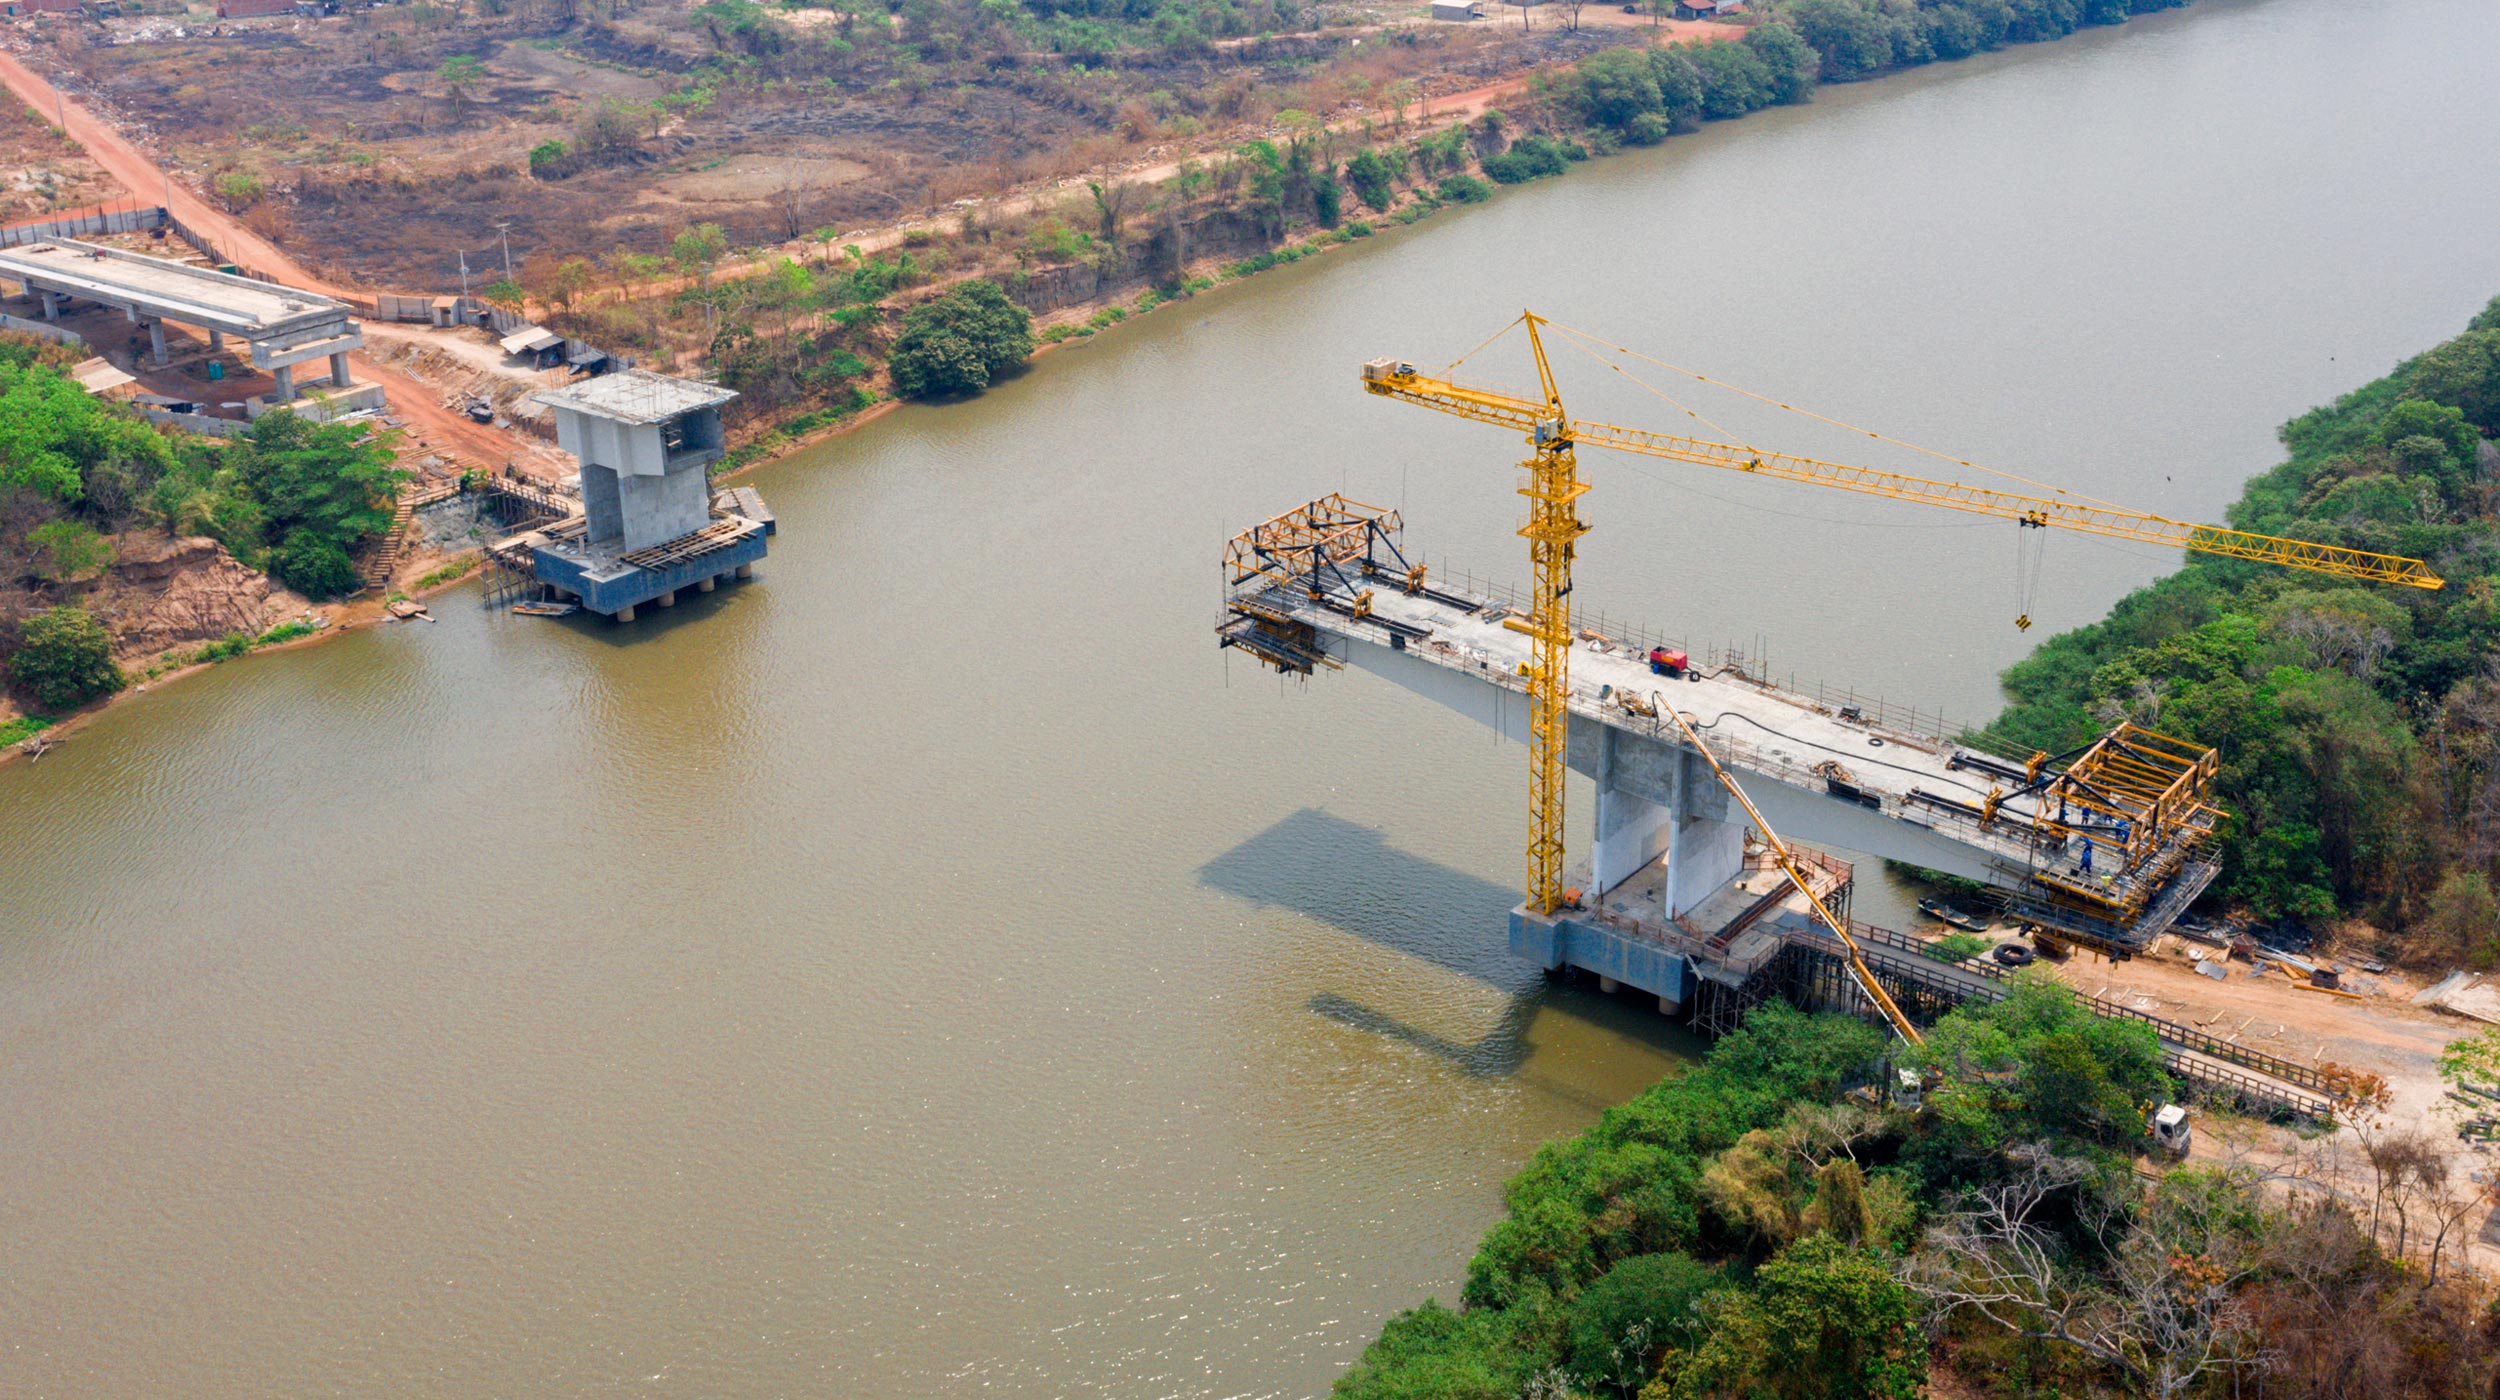 On the Cuiabá River in Brazil, construction is underway on a new bridge in balanced cantilever method that will link the Parque do Lago in Várzea Grande with the Atalaia Park in Brazil.